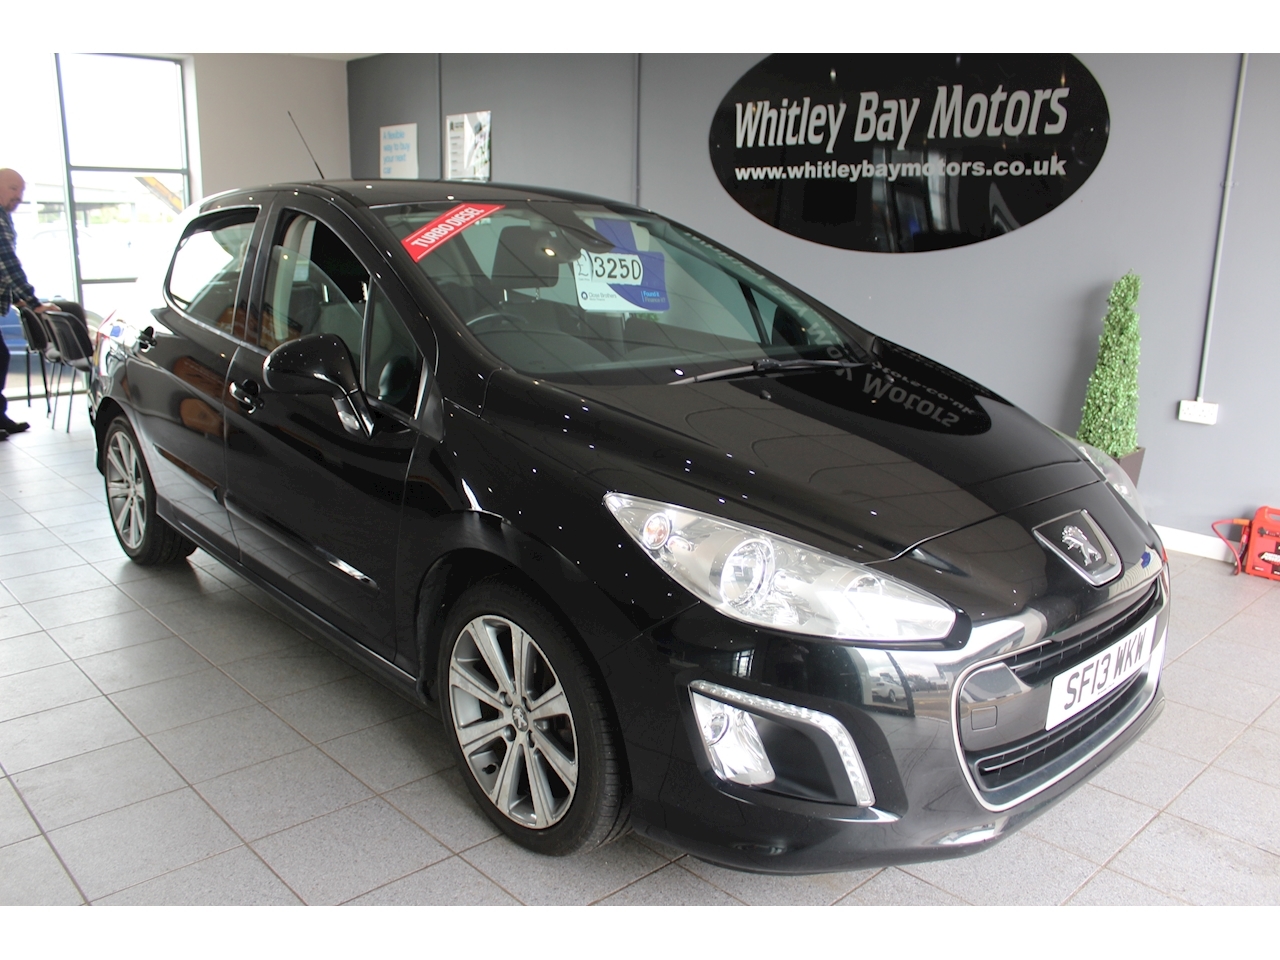 308 E-Hdi Active Hatchback 1.6 Manual Diesel